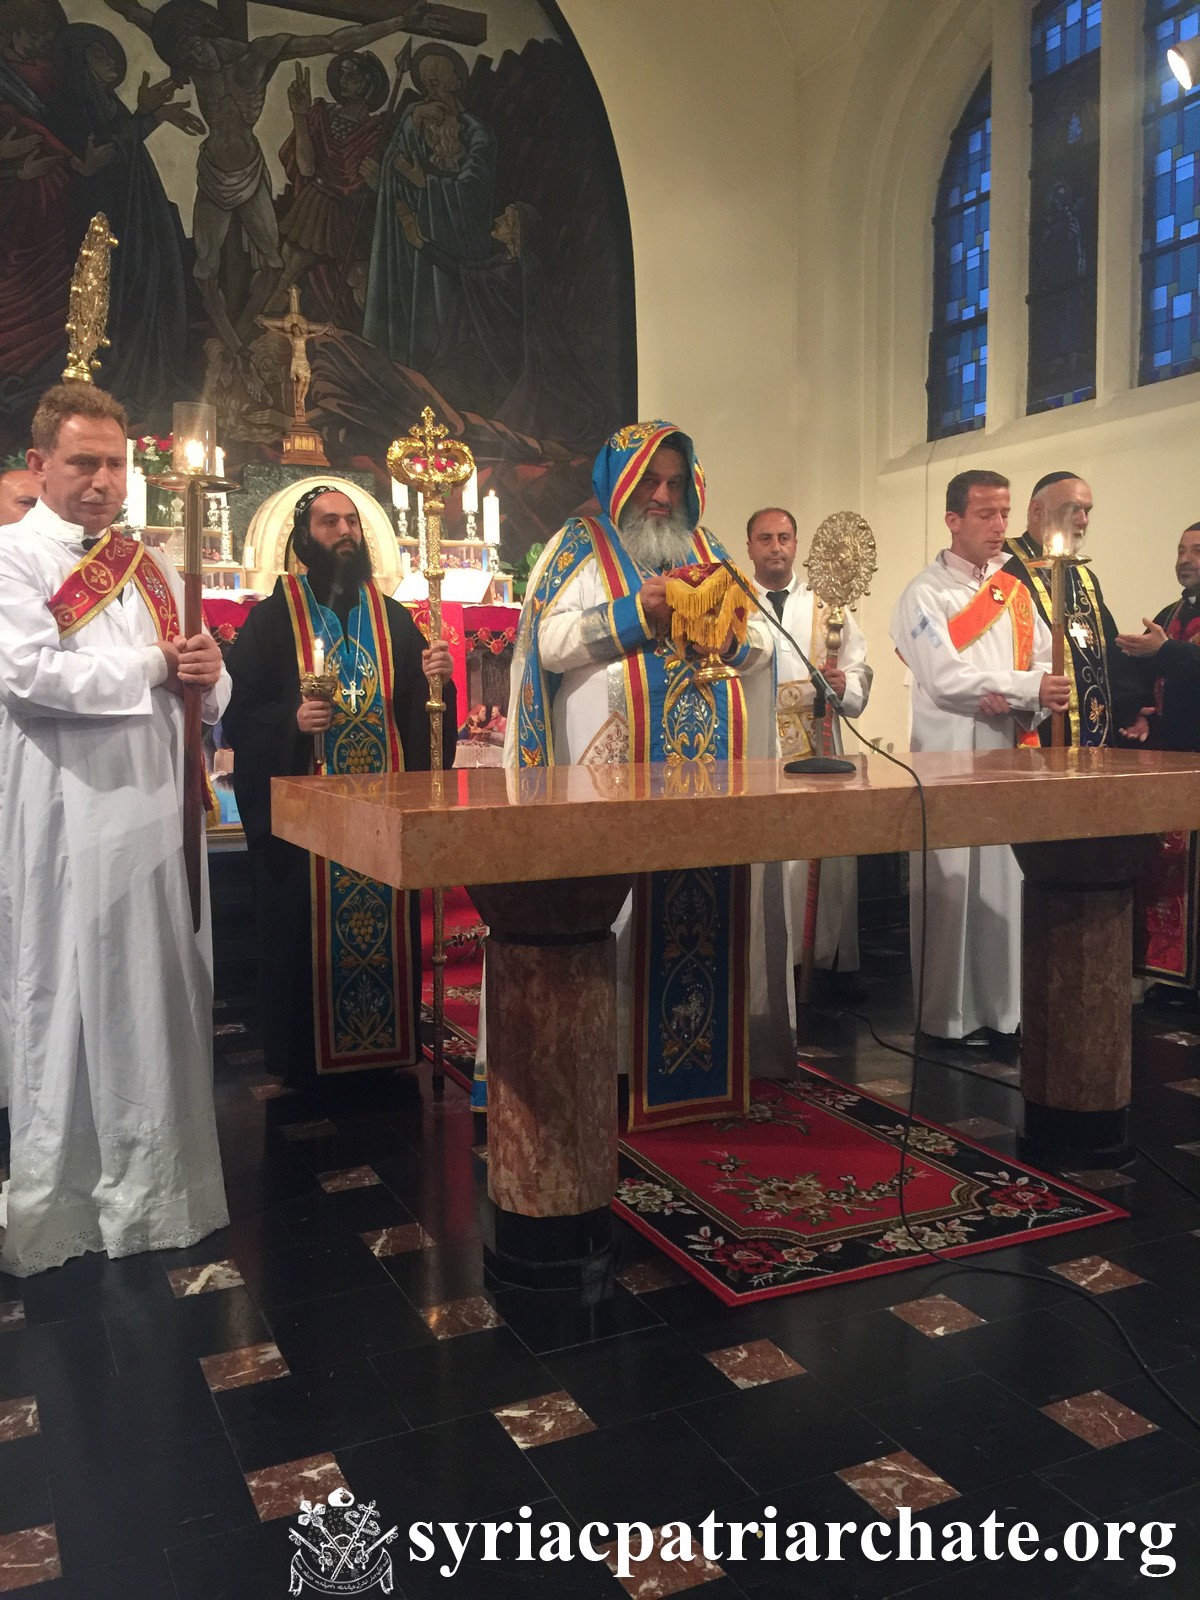 Feast of the Birth of the Virgin Mary Celebrated in Liege